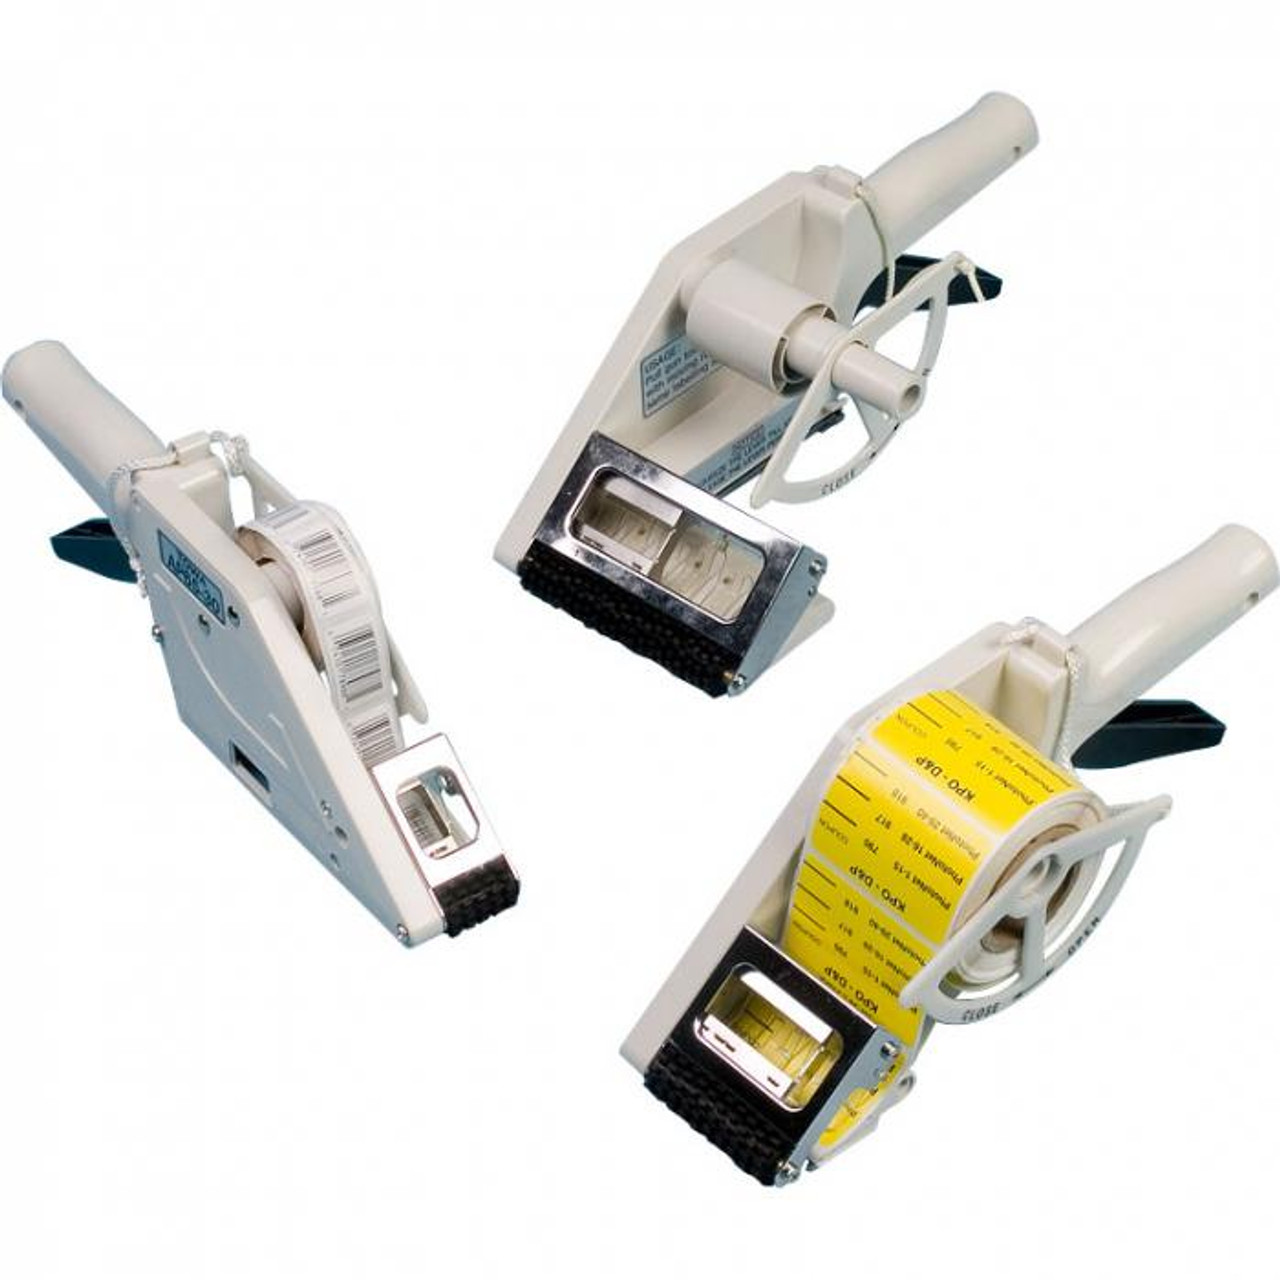 Hand-Held Label Dispenser Applicator Machine for Labels up to 3.93